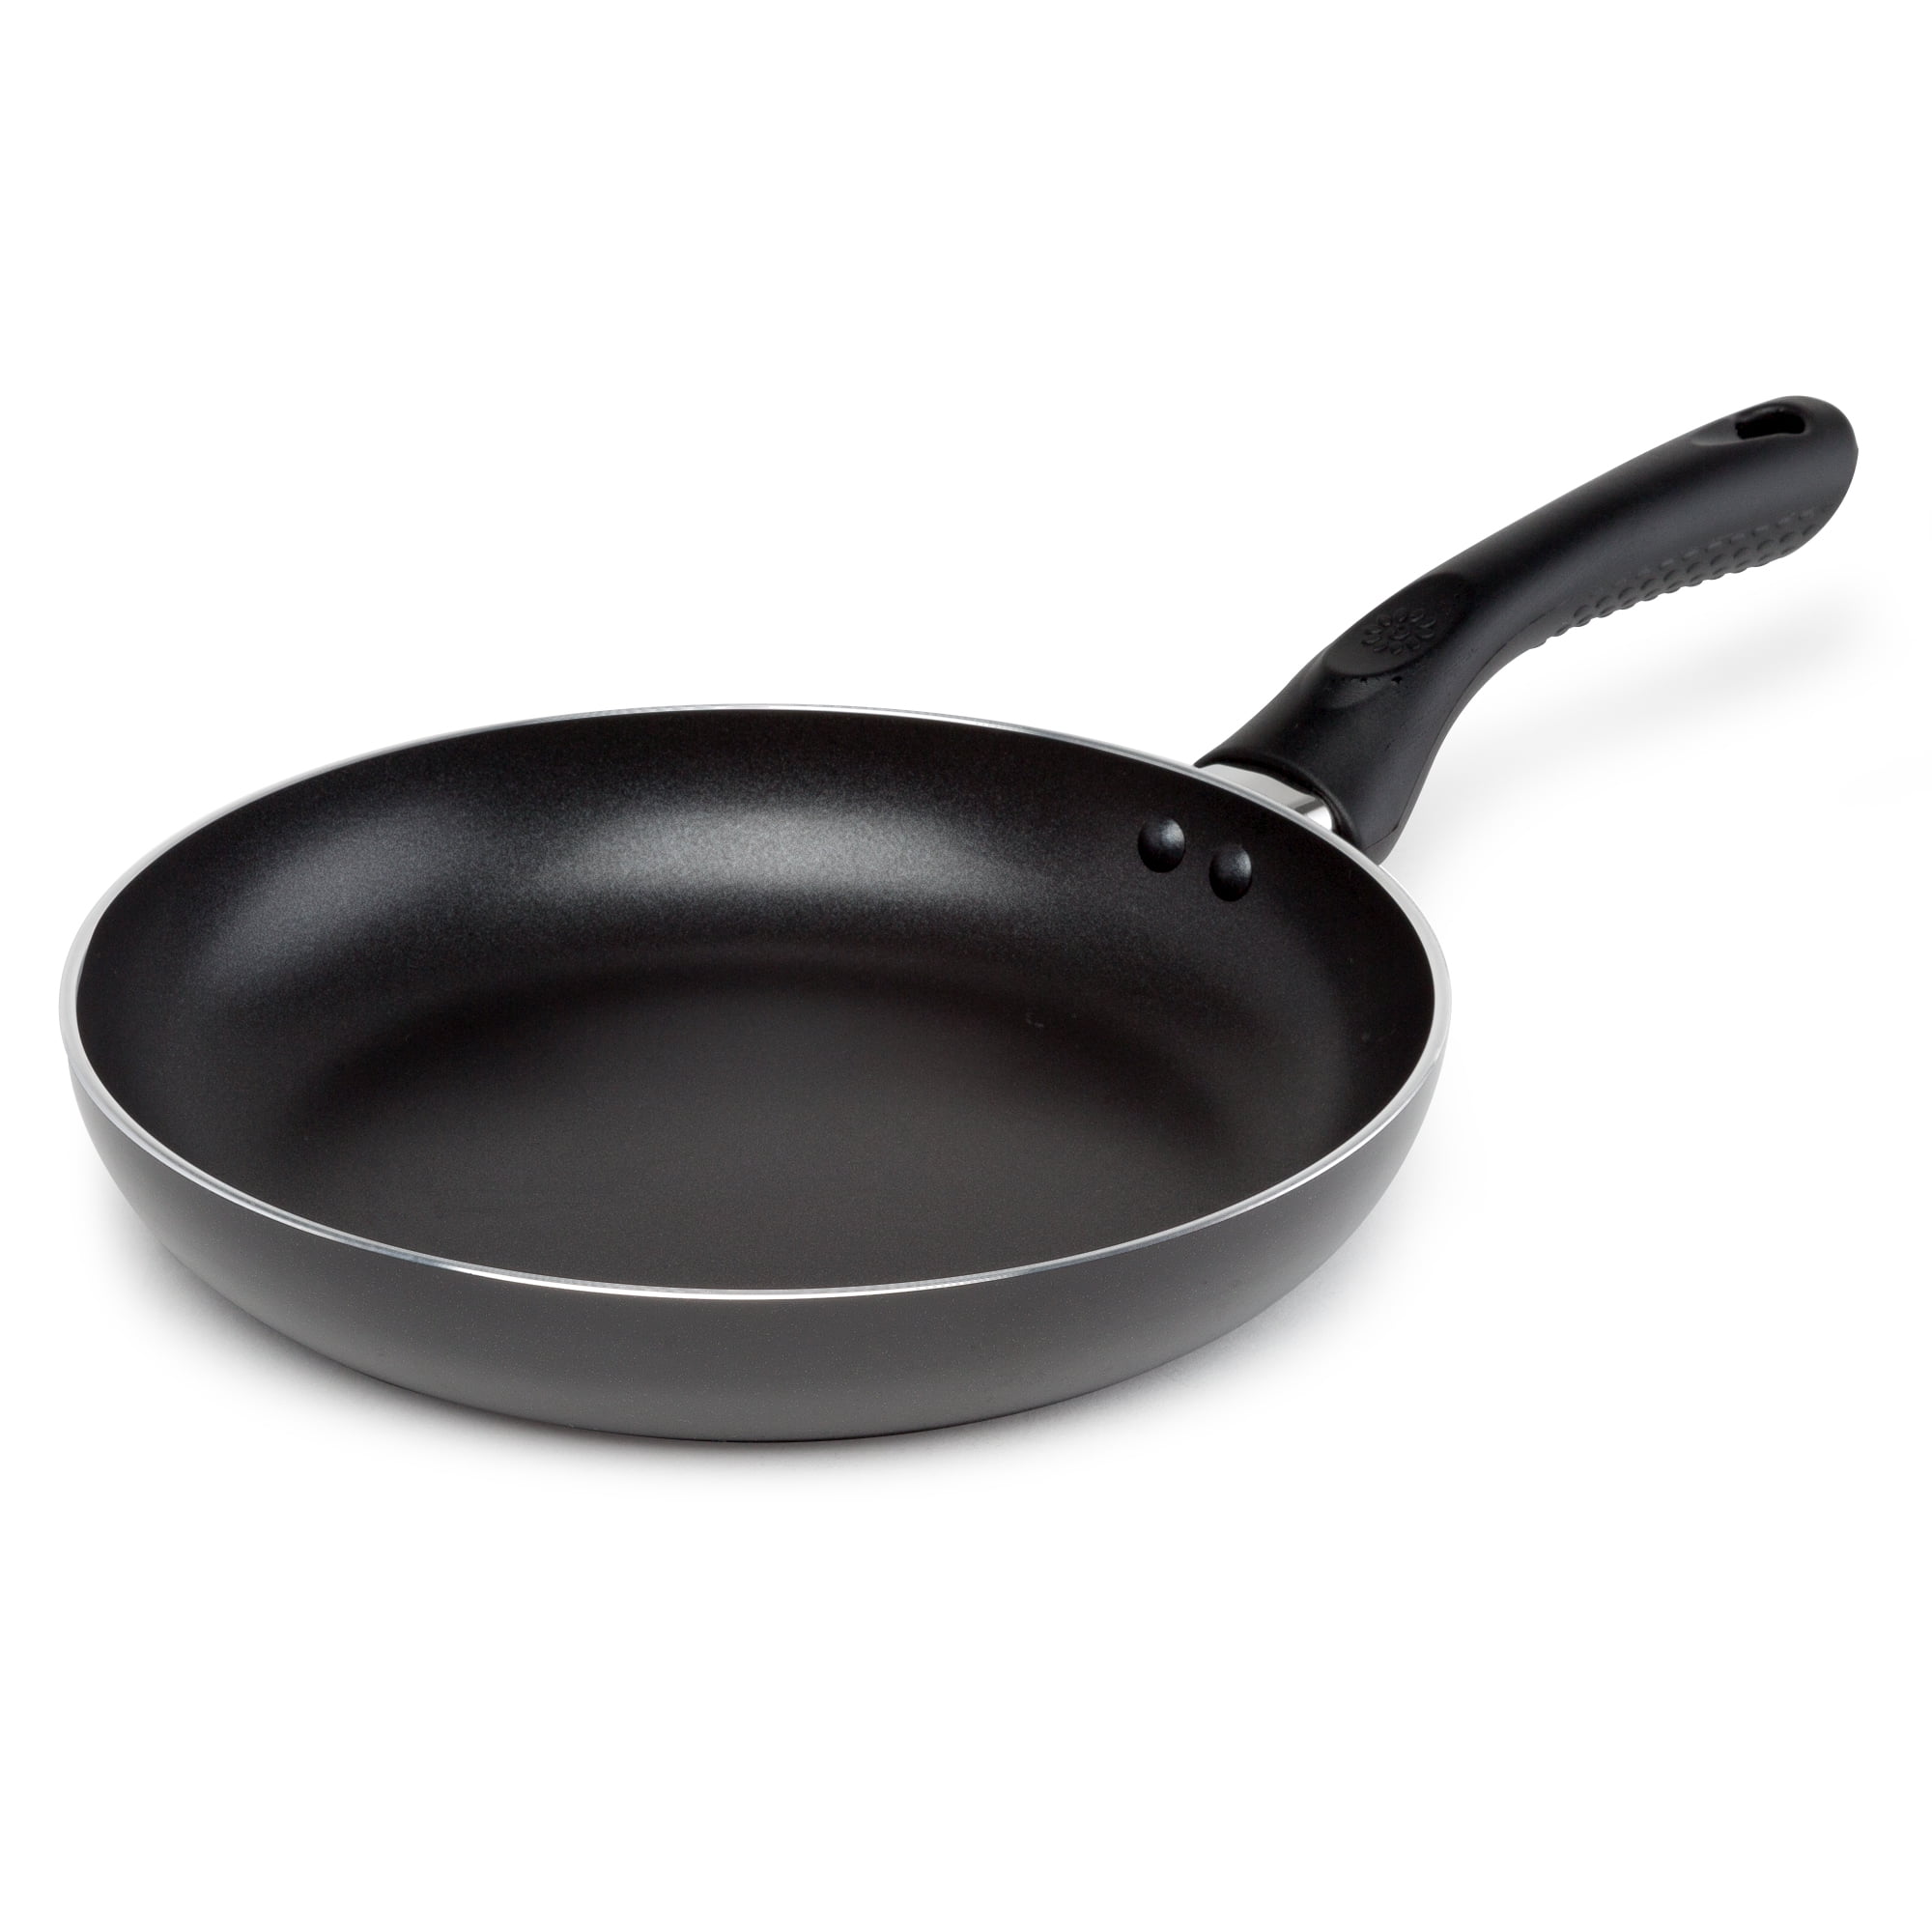 Ecolution Cookware - Fry, sauté, or sear with the Bliss Ceramic Non-Stick  Fry Pan, now with a dark woodgrain finish handle. Buy now for 25% off!